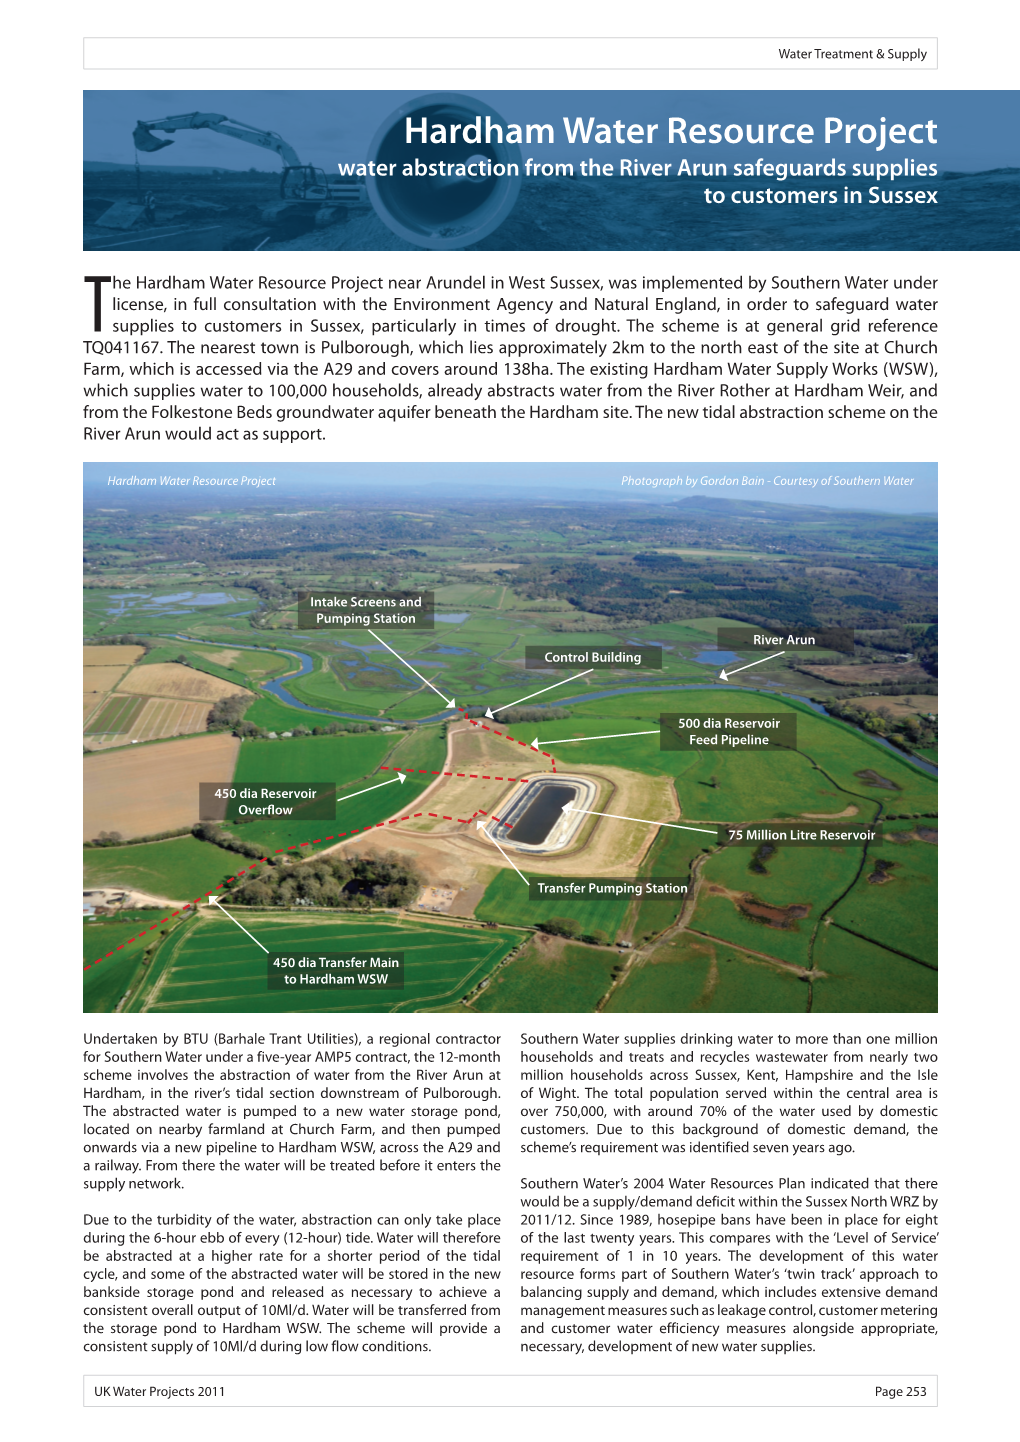 Hardham Water Resource Project (2011)